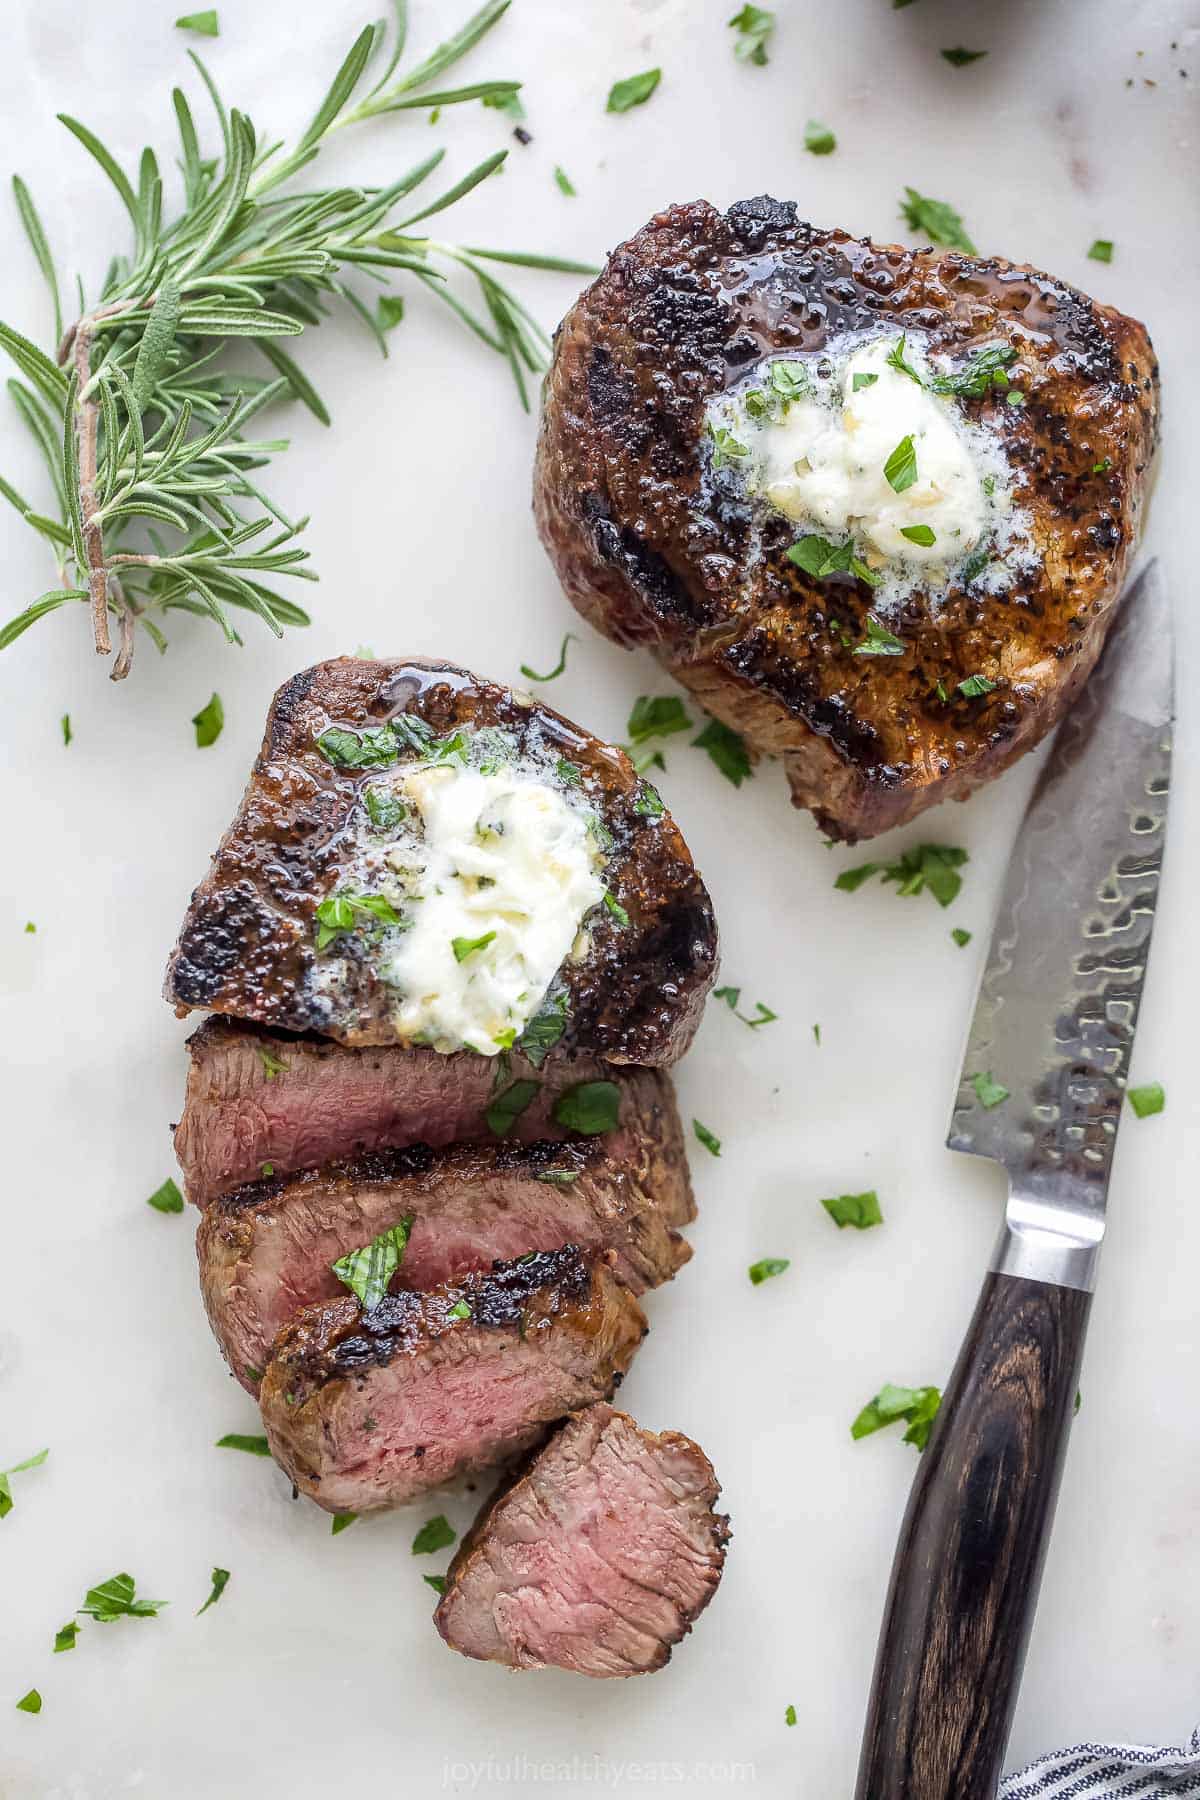 One w،le grilled filet mignon and another sliced grilled filet mignon recipe.